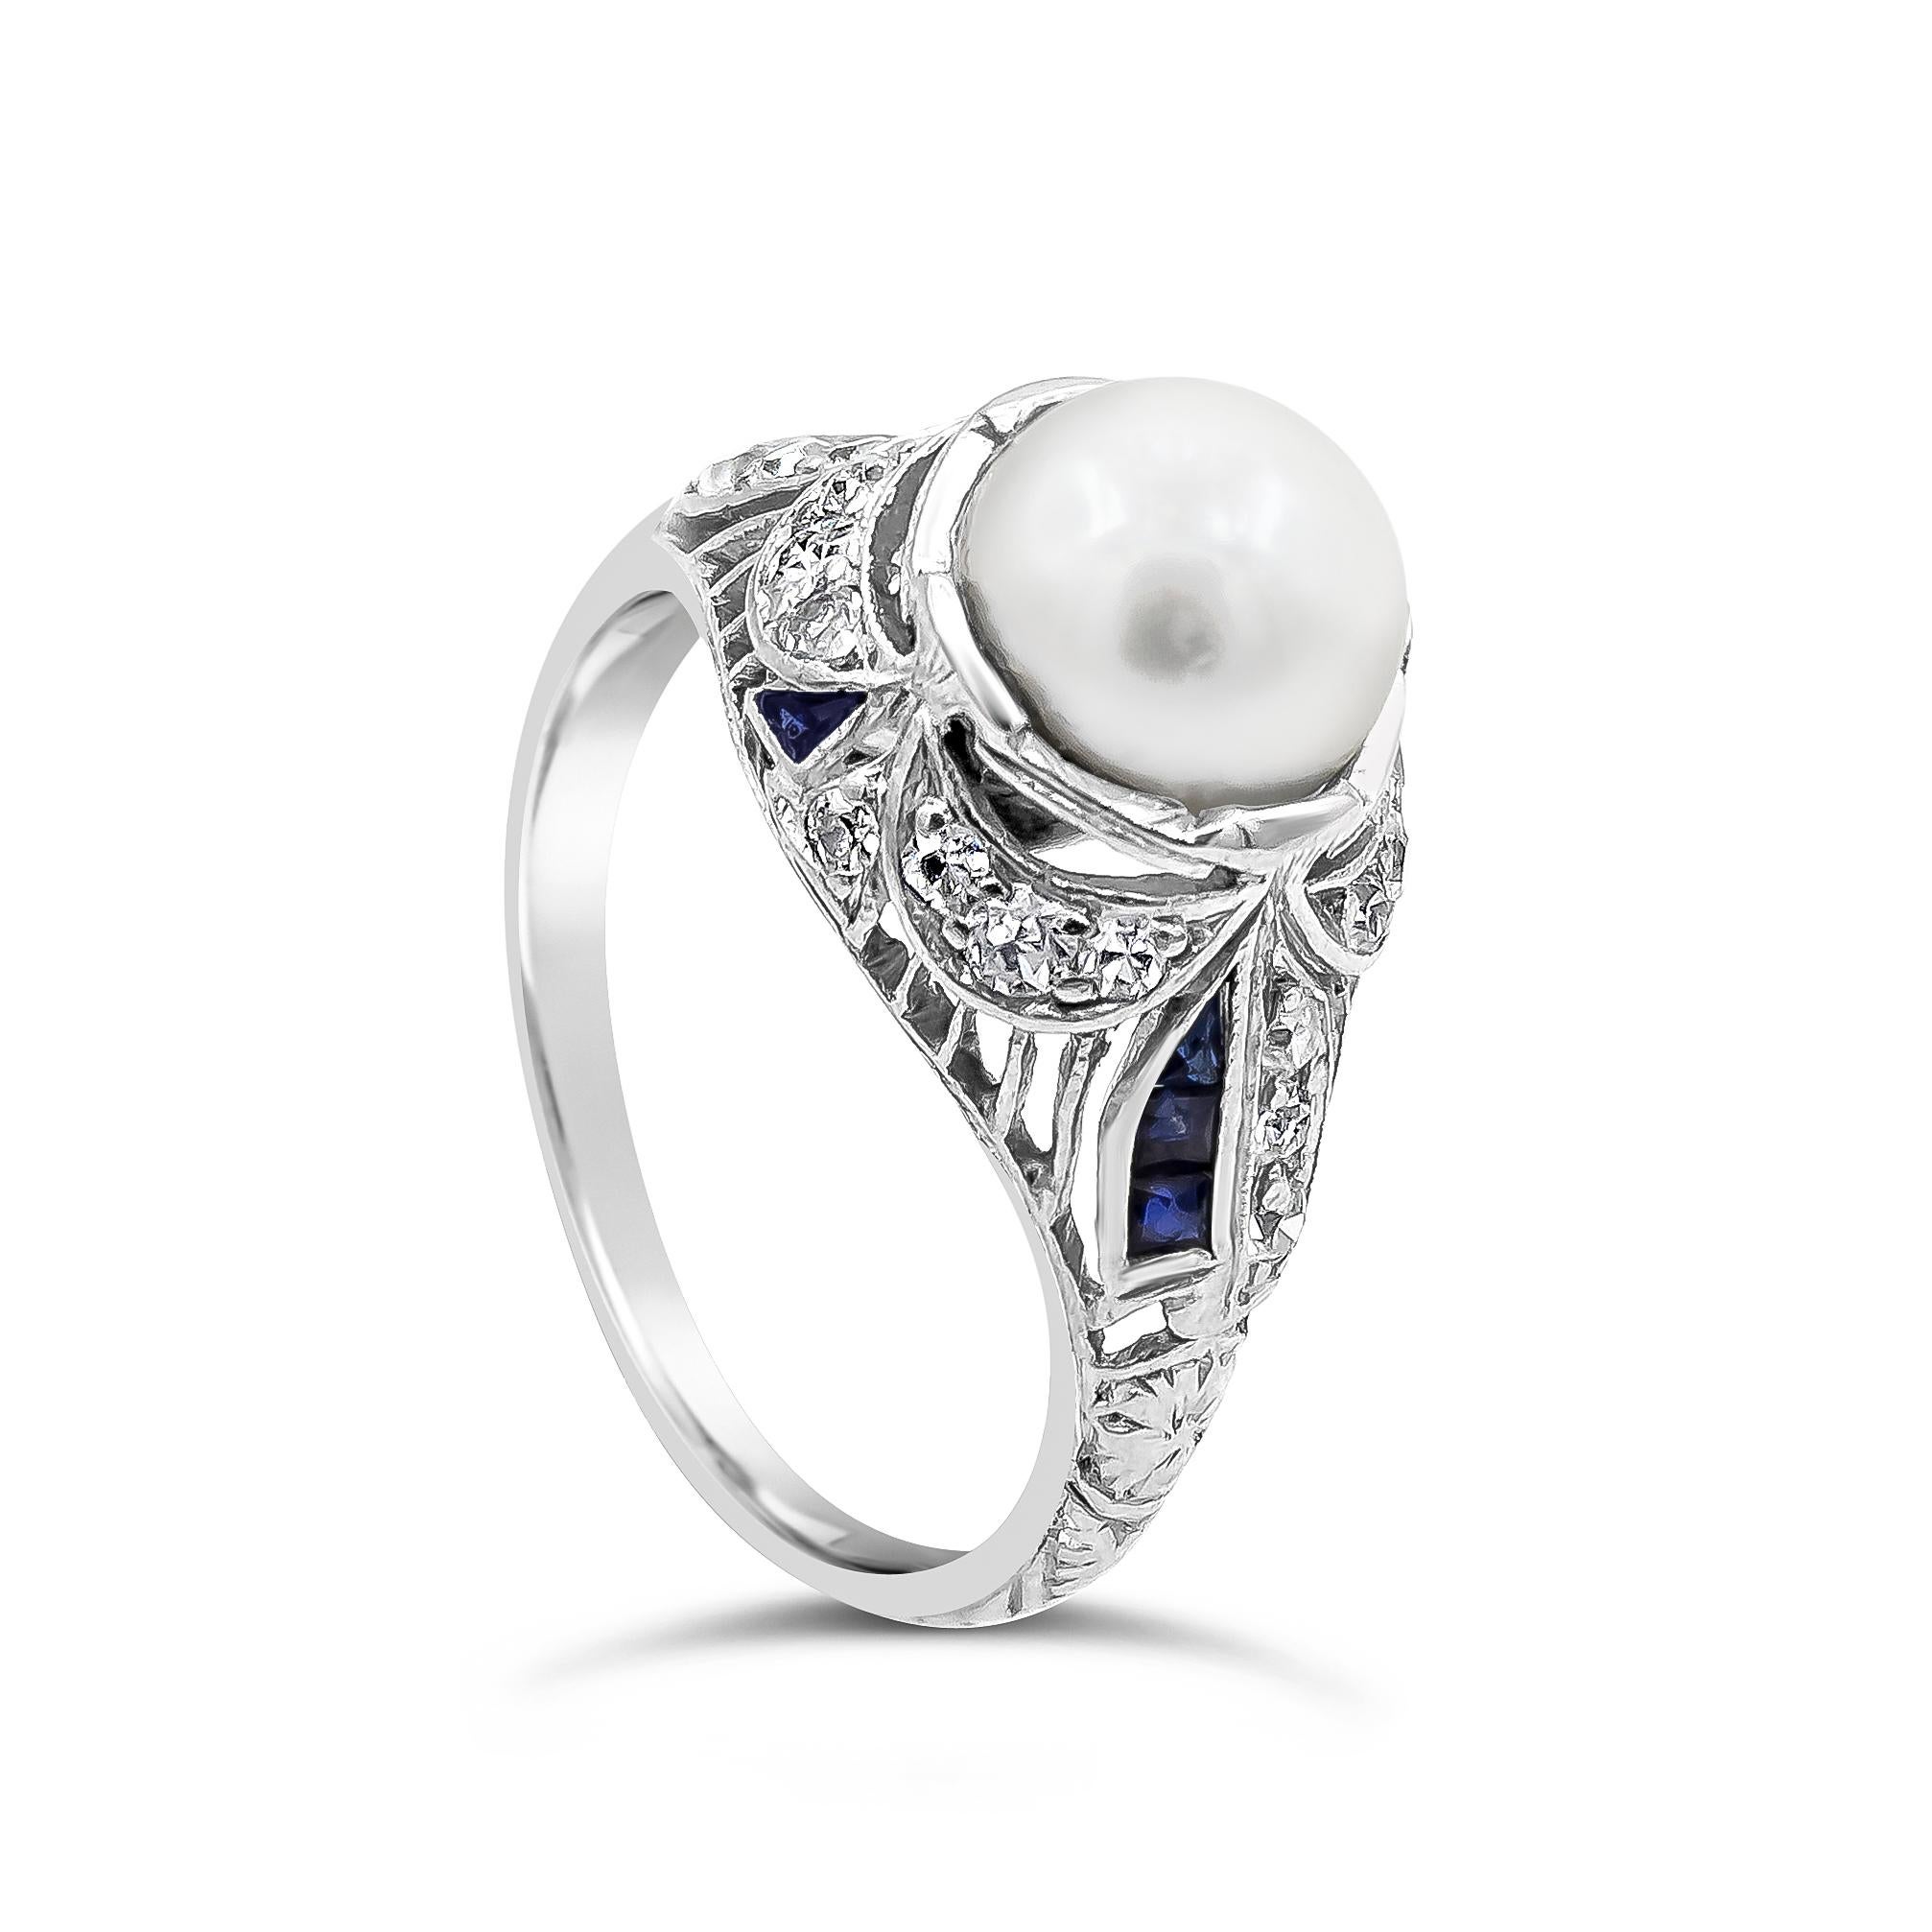 An original antique ring showcasing a 7.15 millimeter pearl, set in an Art Deco style setting encrusted with diamonds and sapphires. Diamonds weigh 0.35 carats total; sapphires weigh 0.17 carats total. Setting made in platinum. Size 5 US.

Style